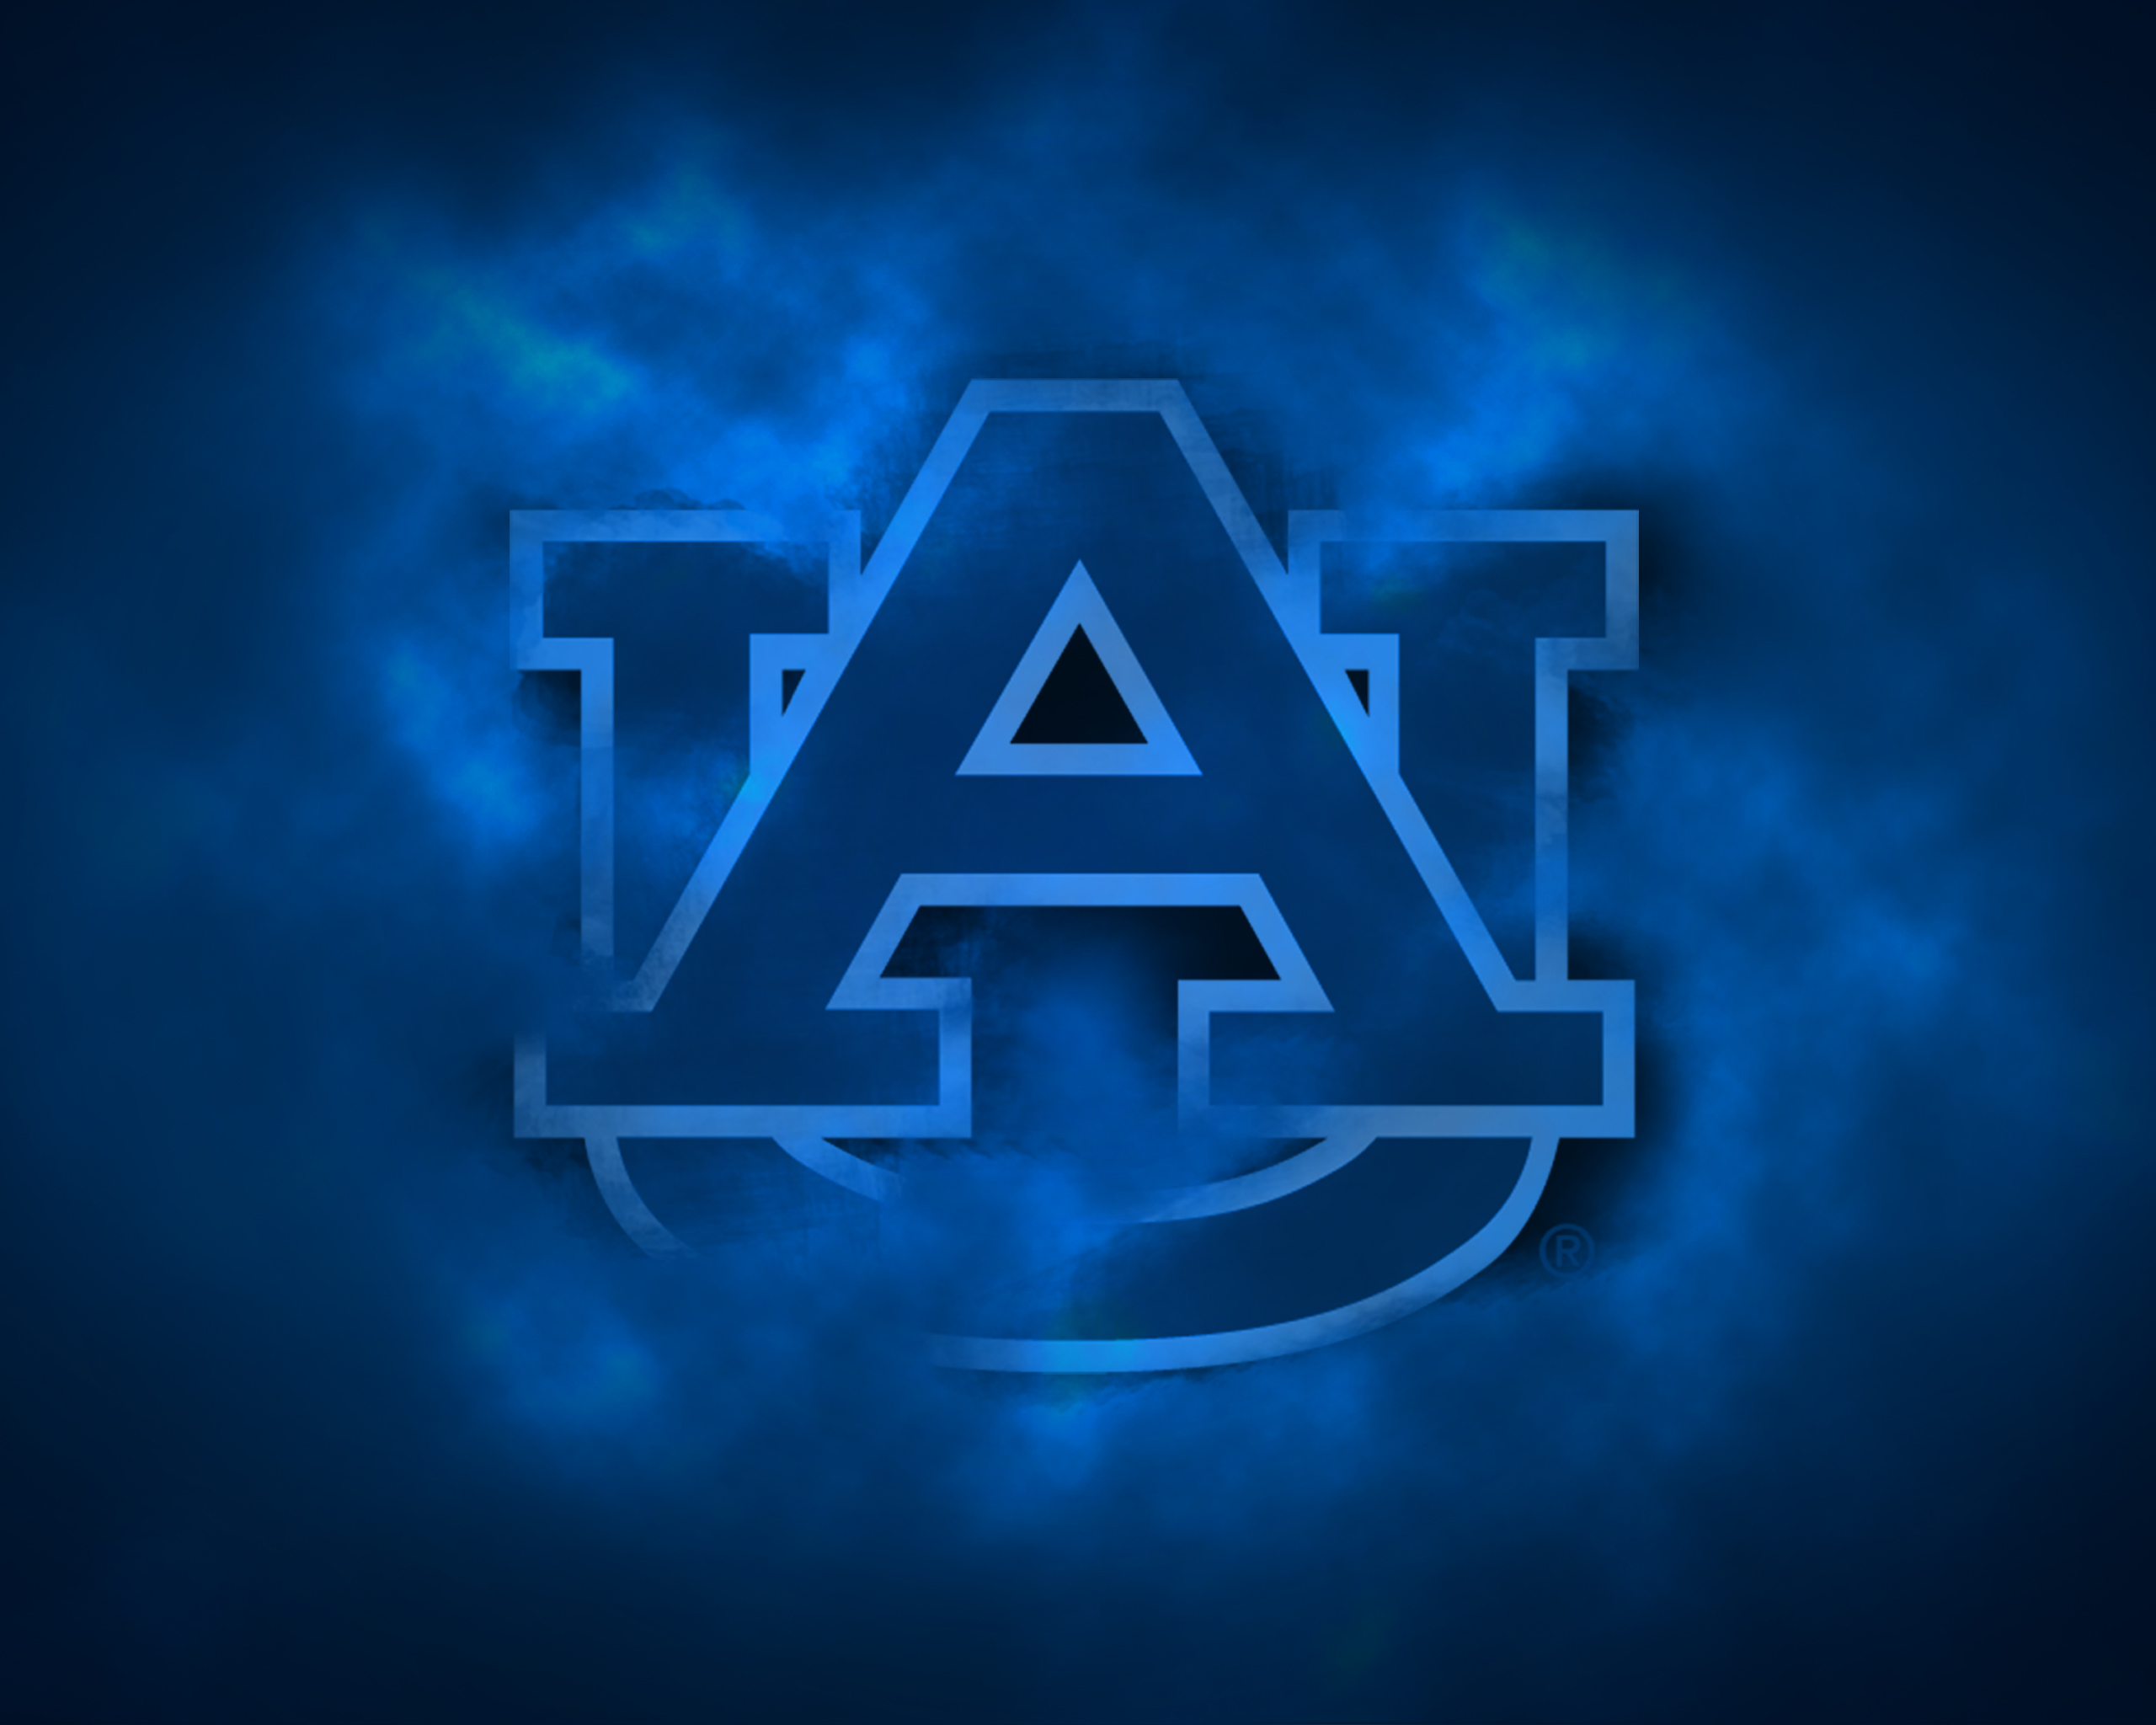 Auburn Football on Twitter Update your wallpaper while youre here   WarEagle  AuburnMade httpstcoay82oqxSS9  X